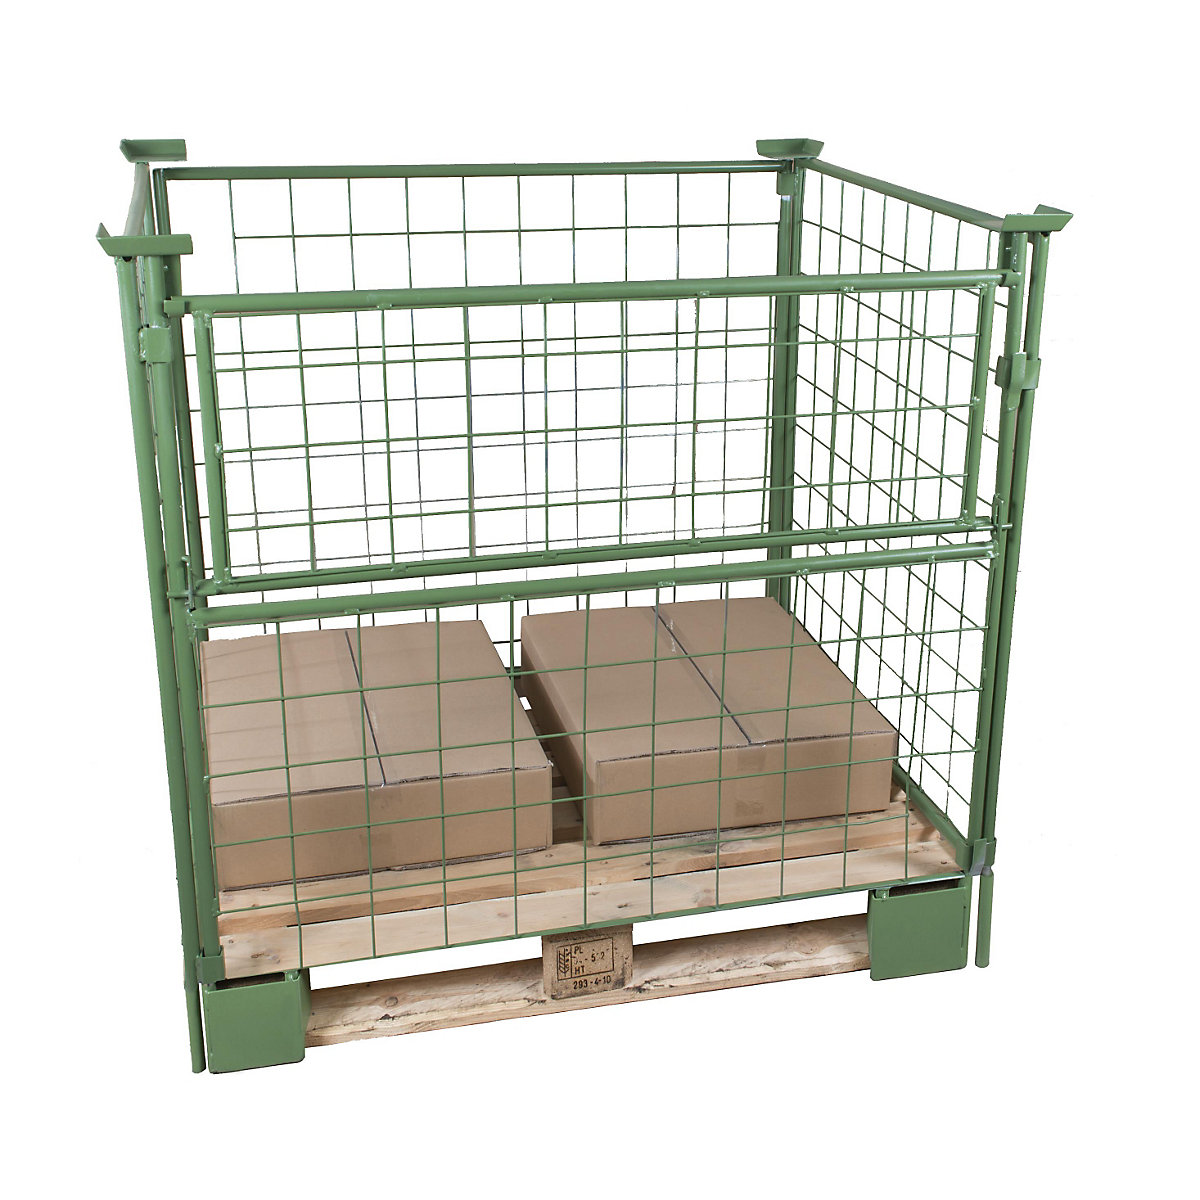 Pallet frame, effective height 800 mm, for attaching, WxL 800 x 1200 mm, 1 long side can be half folded-2